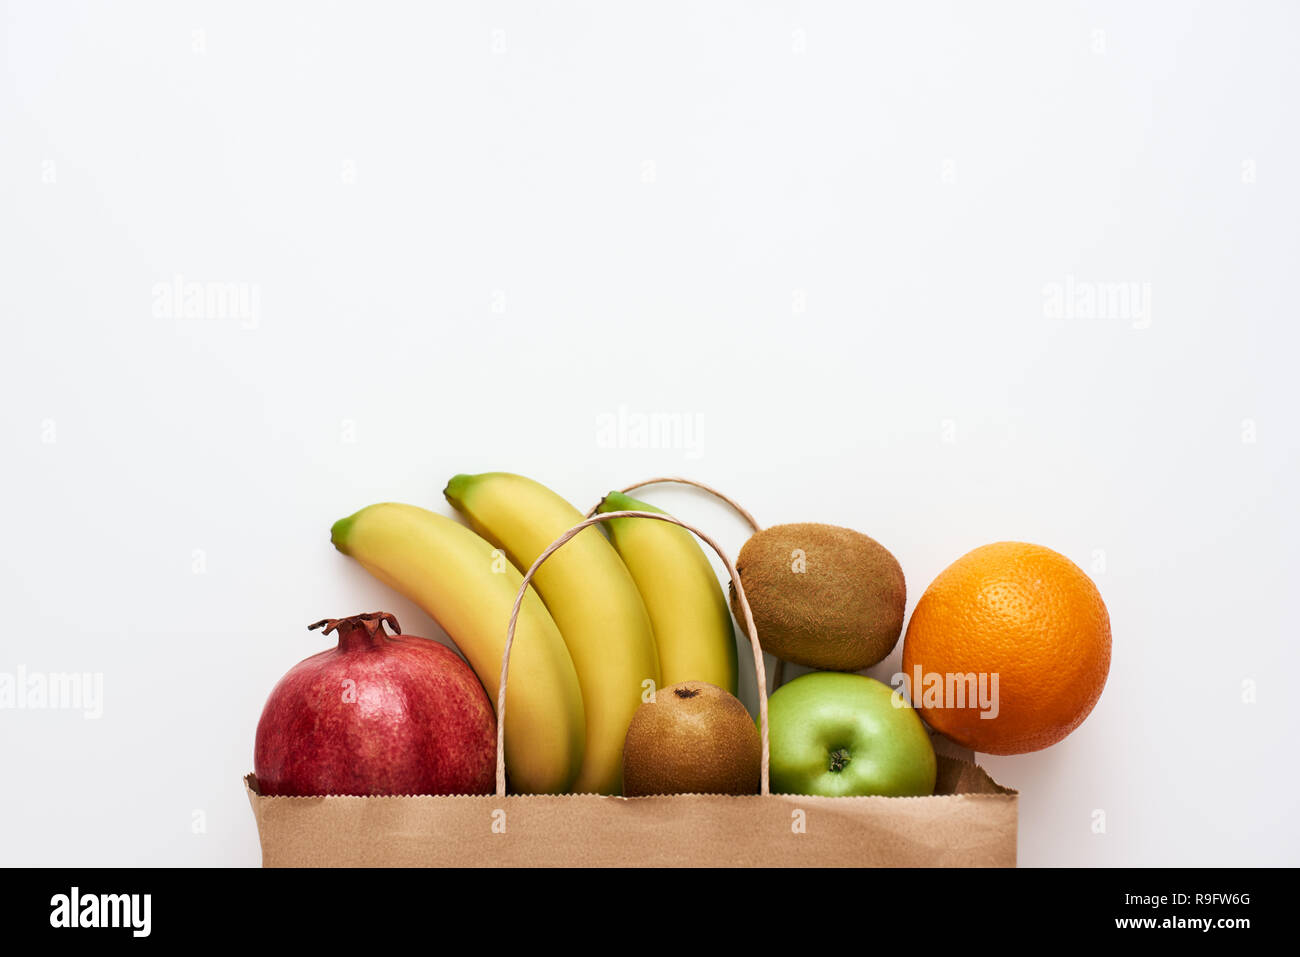 Good quality picture of fresh jucy fruits . Fresh fruits from store or market, isolated Stock Photo